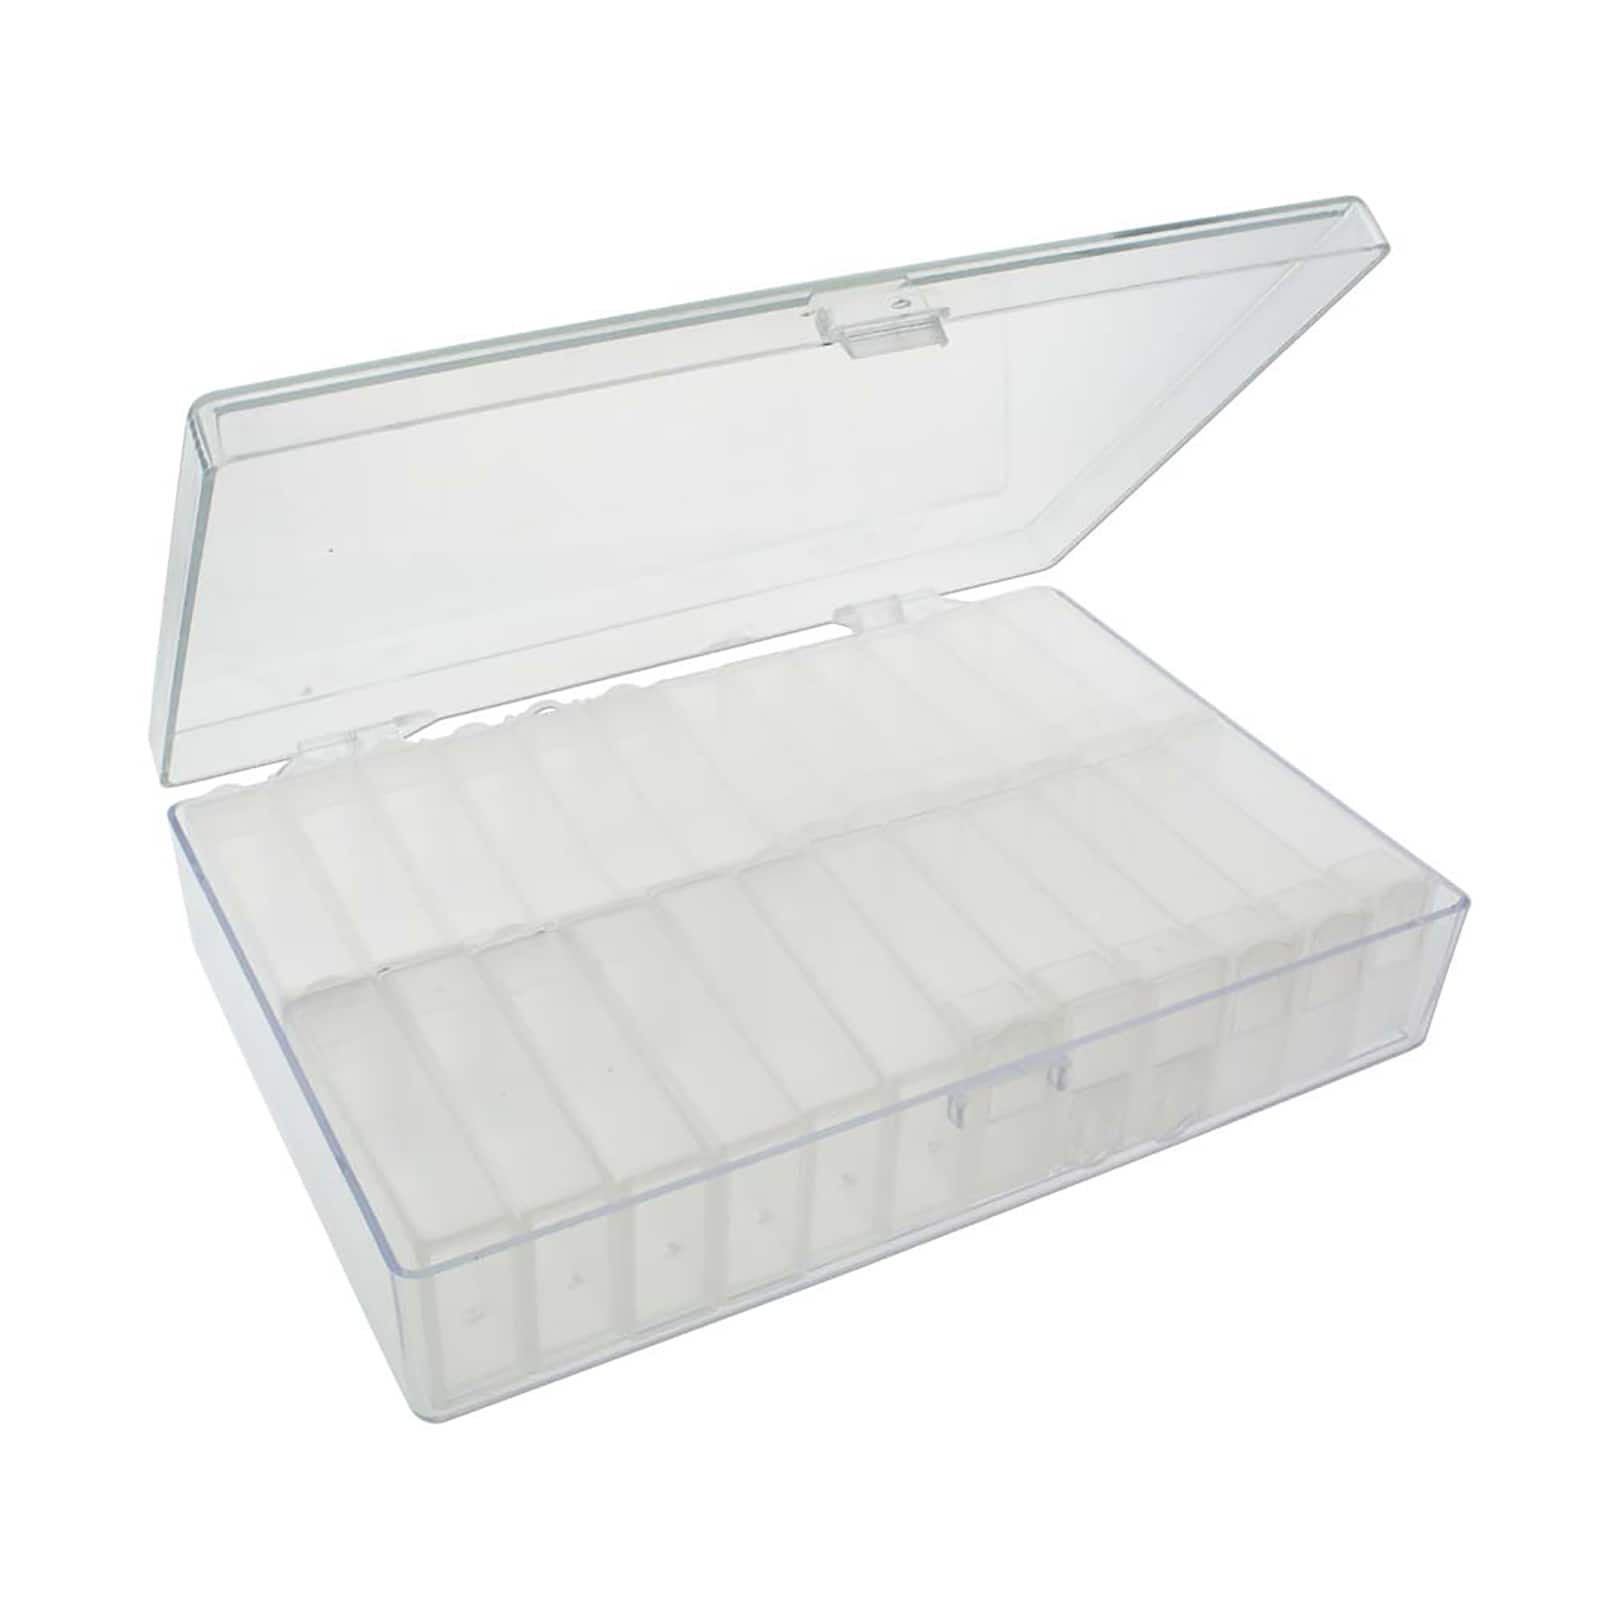 17-Compartment Bead Organizer by Bead Landing | 10.25 x 6.75 x 1.625 | Michaels